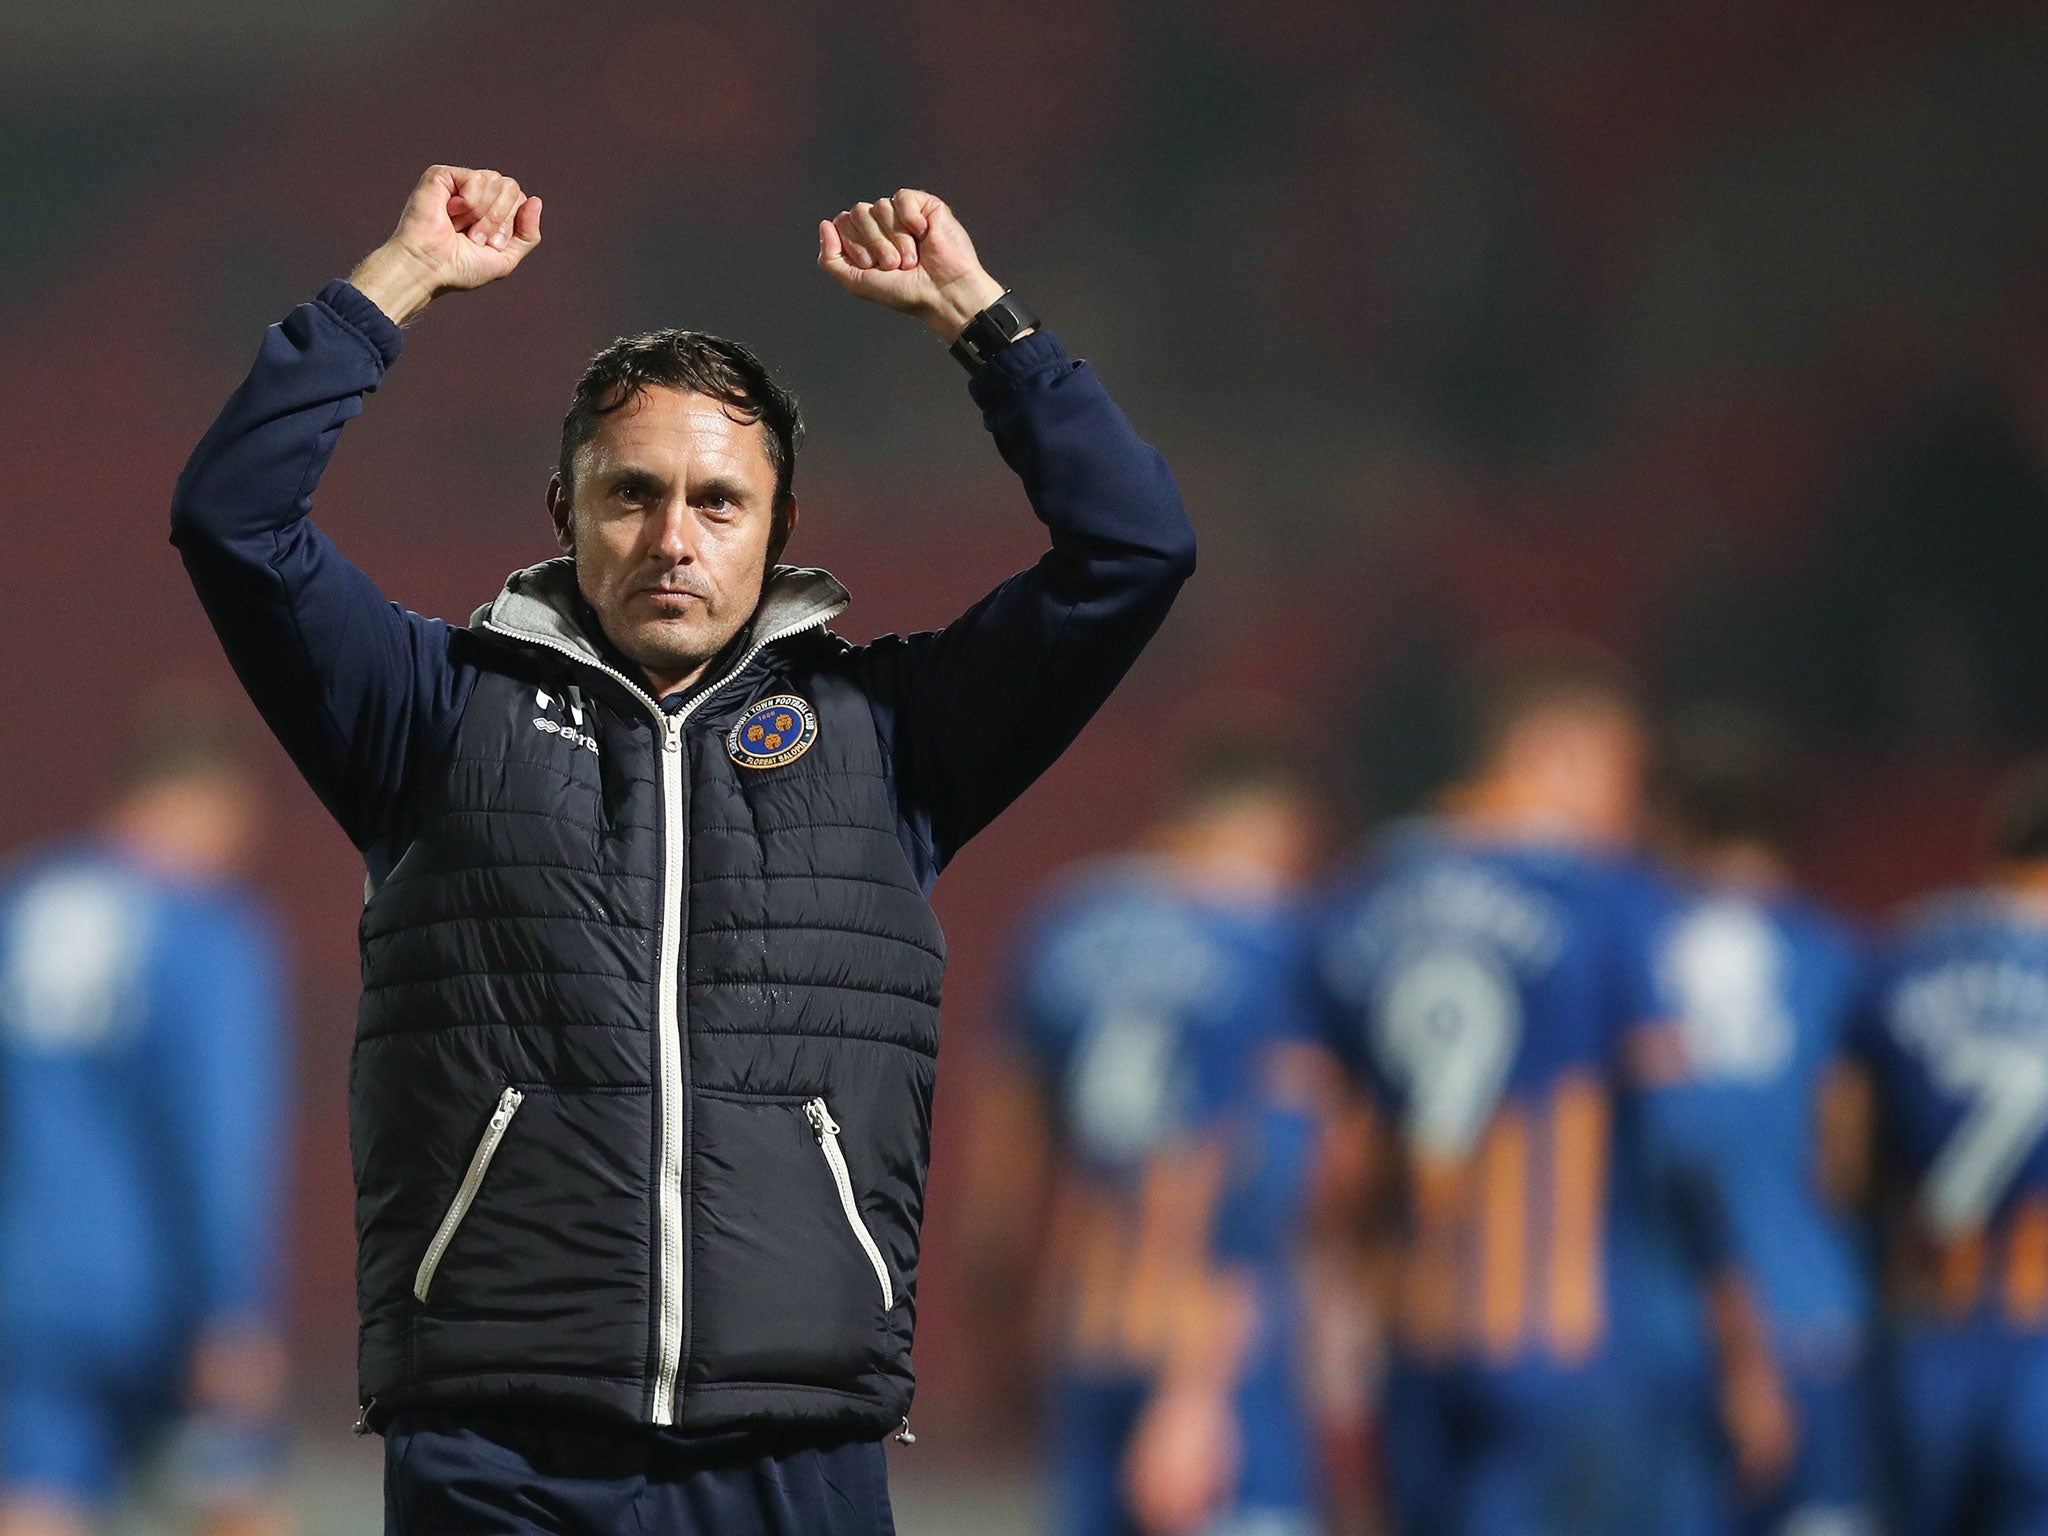 Just staying in League 1 is a major achievement for Shrewsbury - Paul Hurst deserves high praise